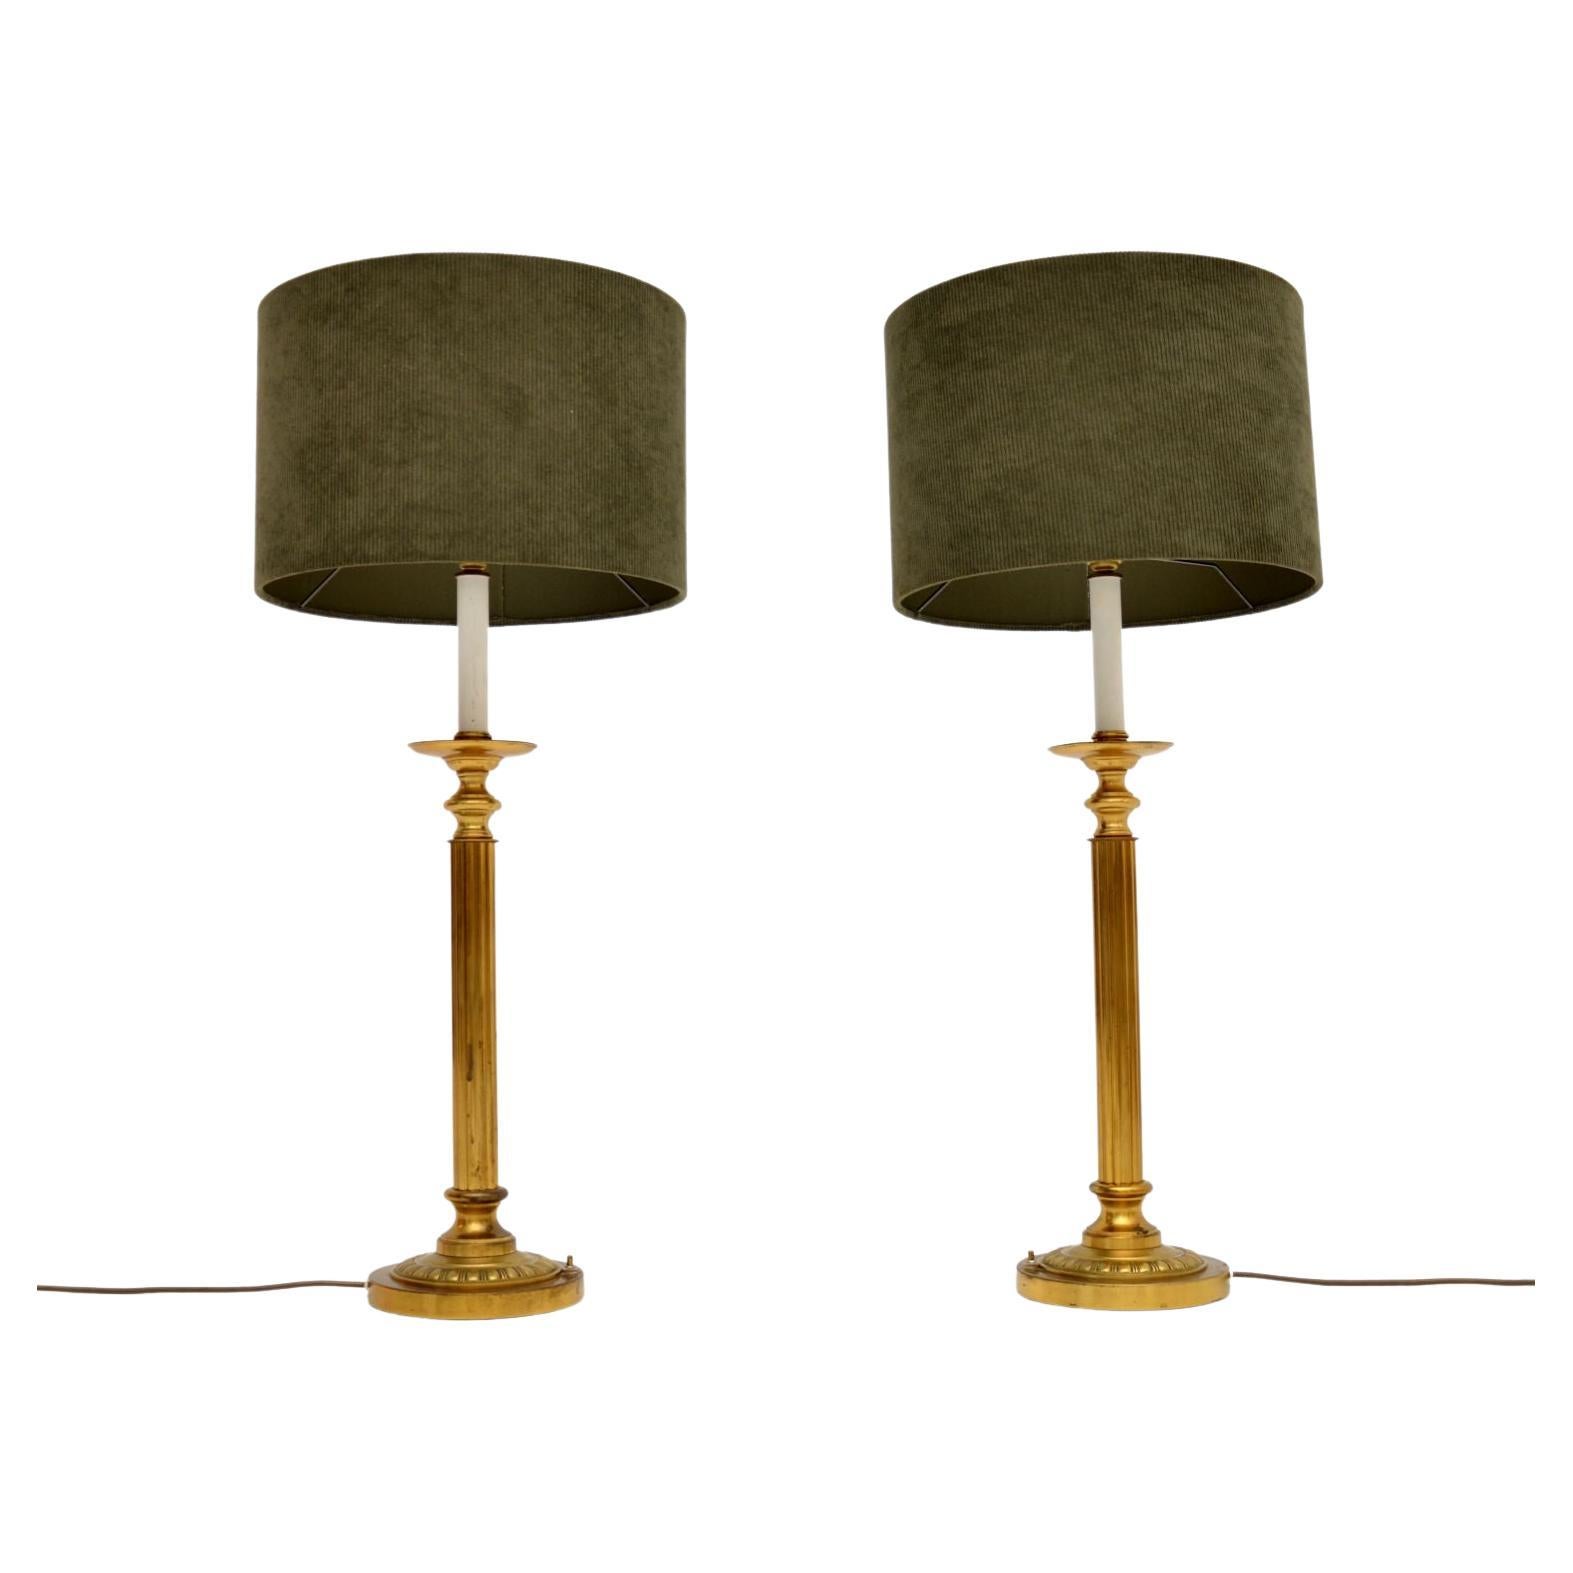 Pair of Antique Fluted Brass Table Lamps